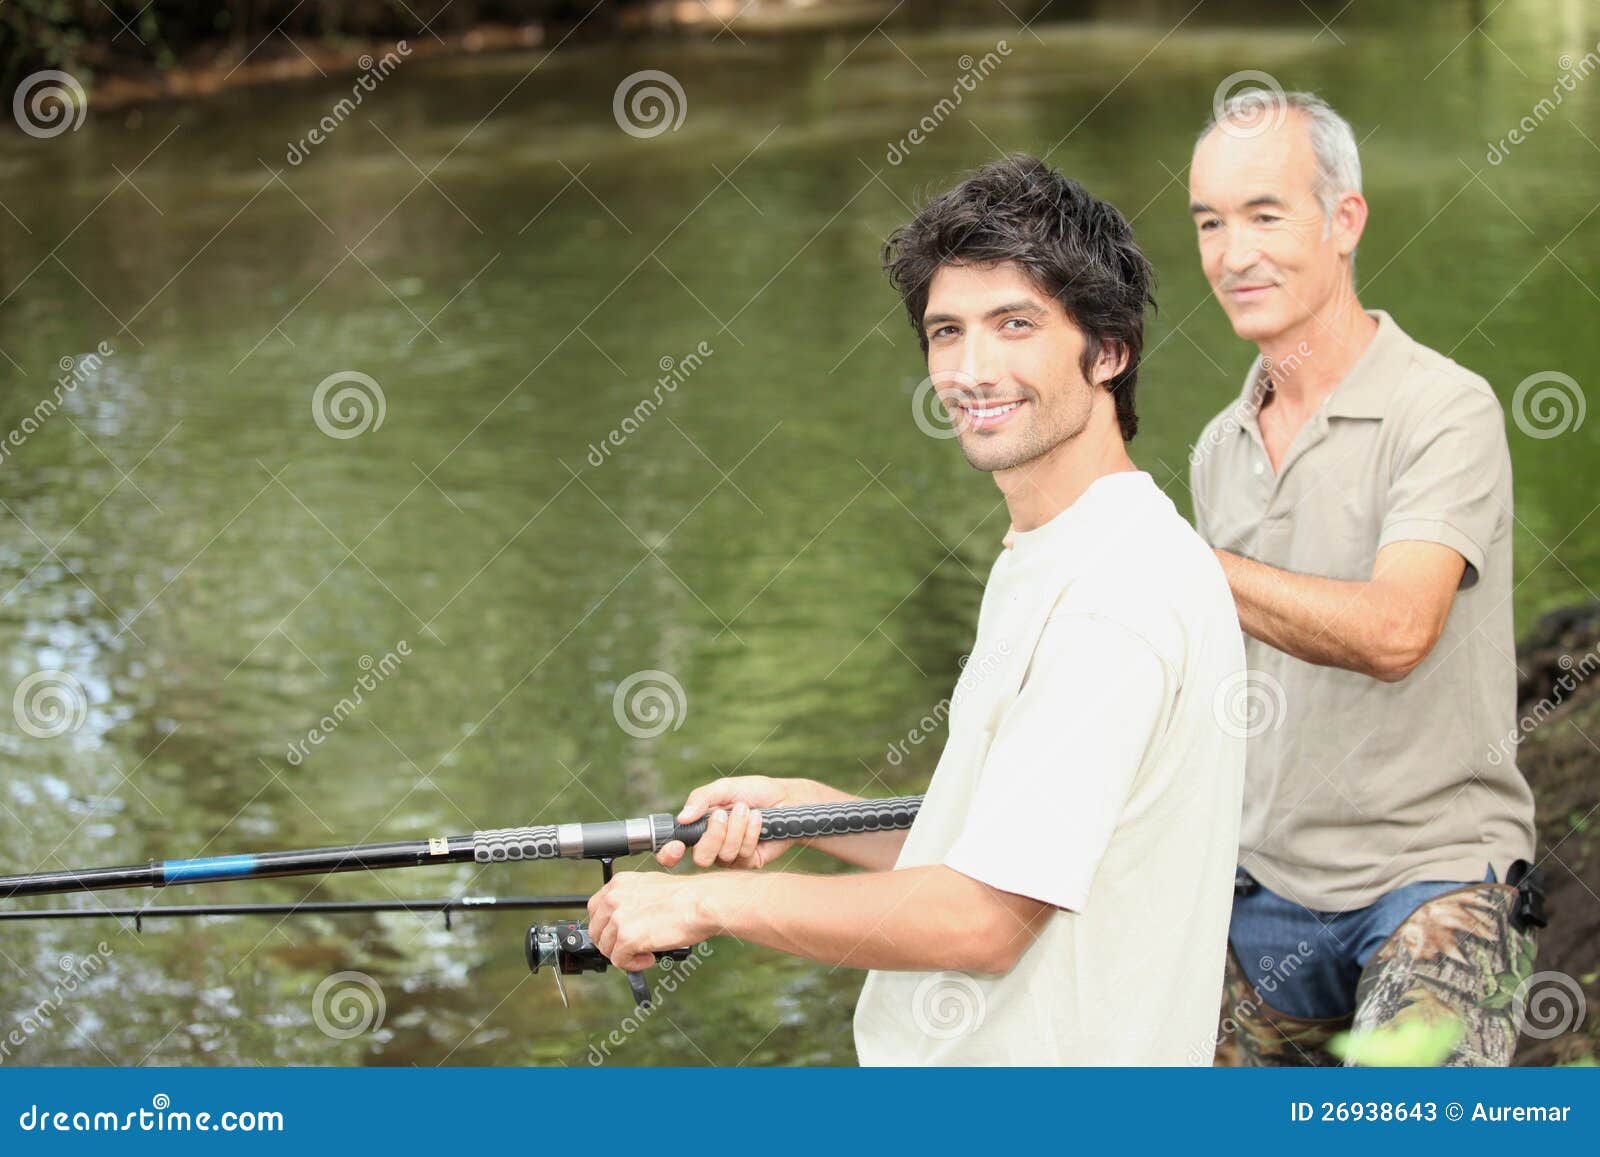 two men angling beside river